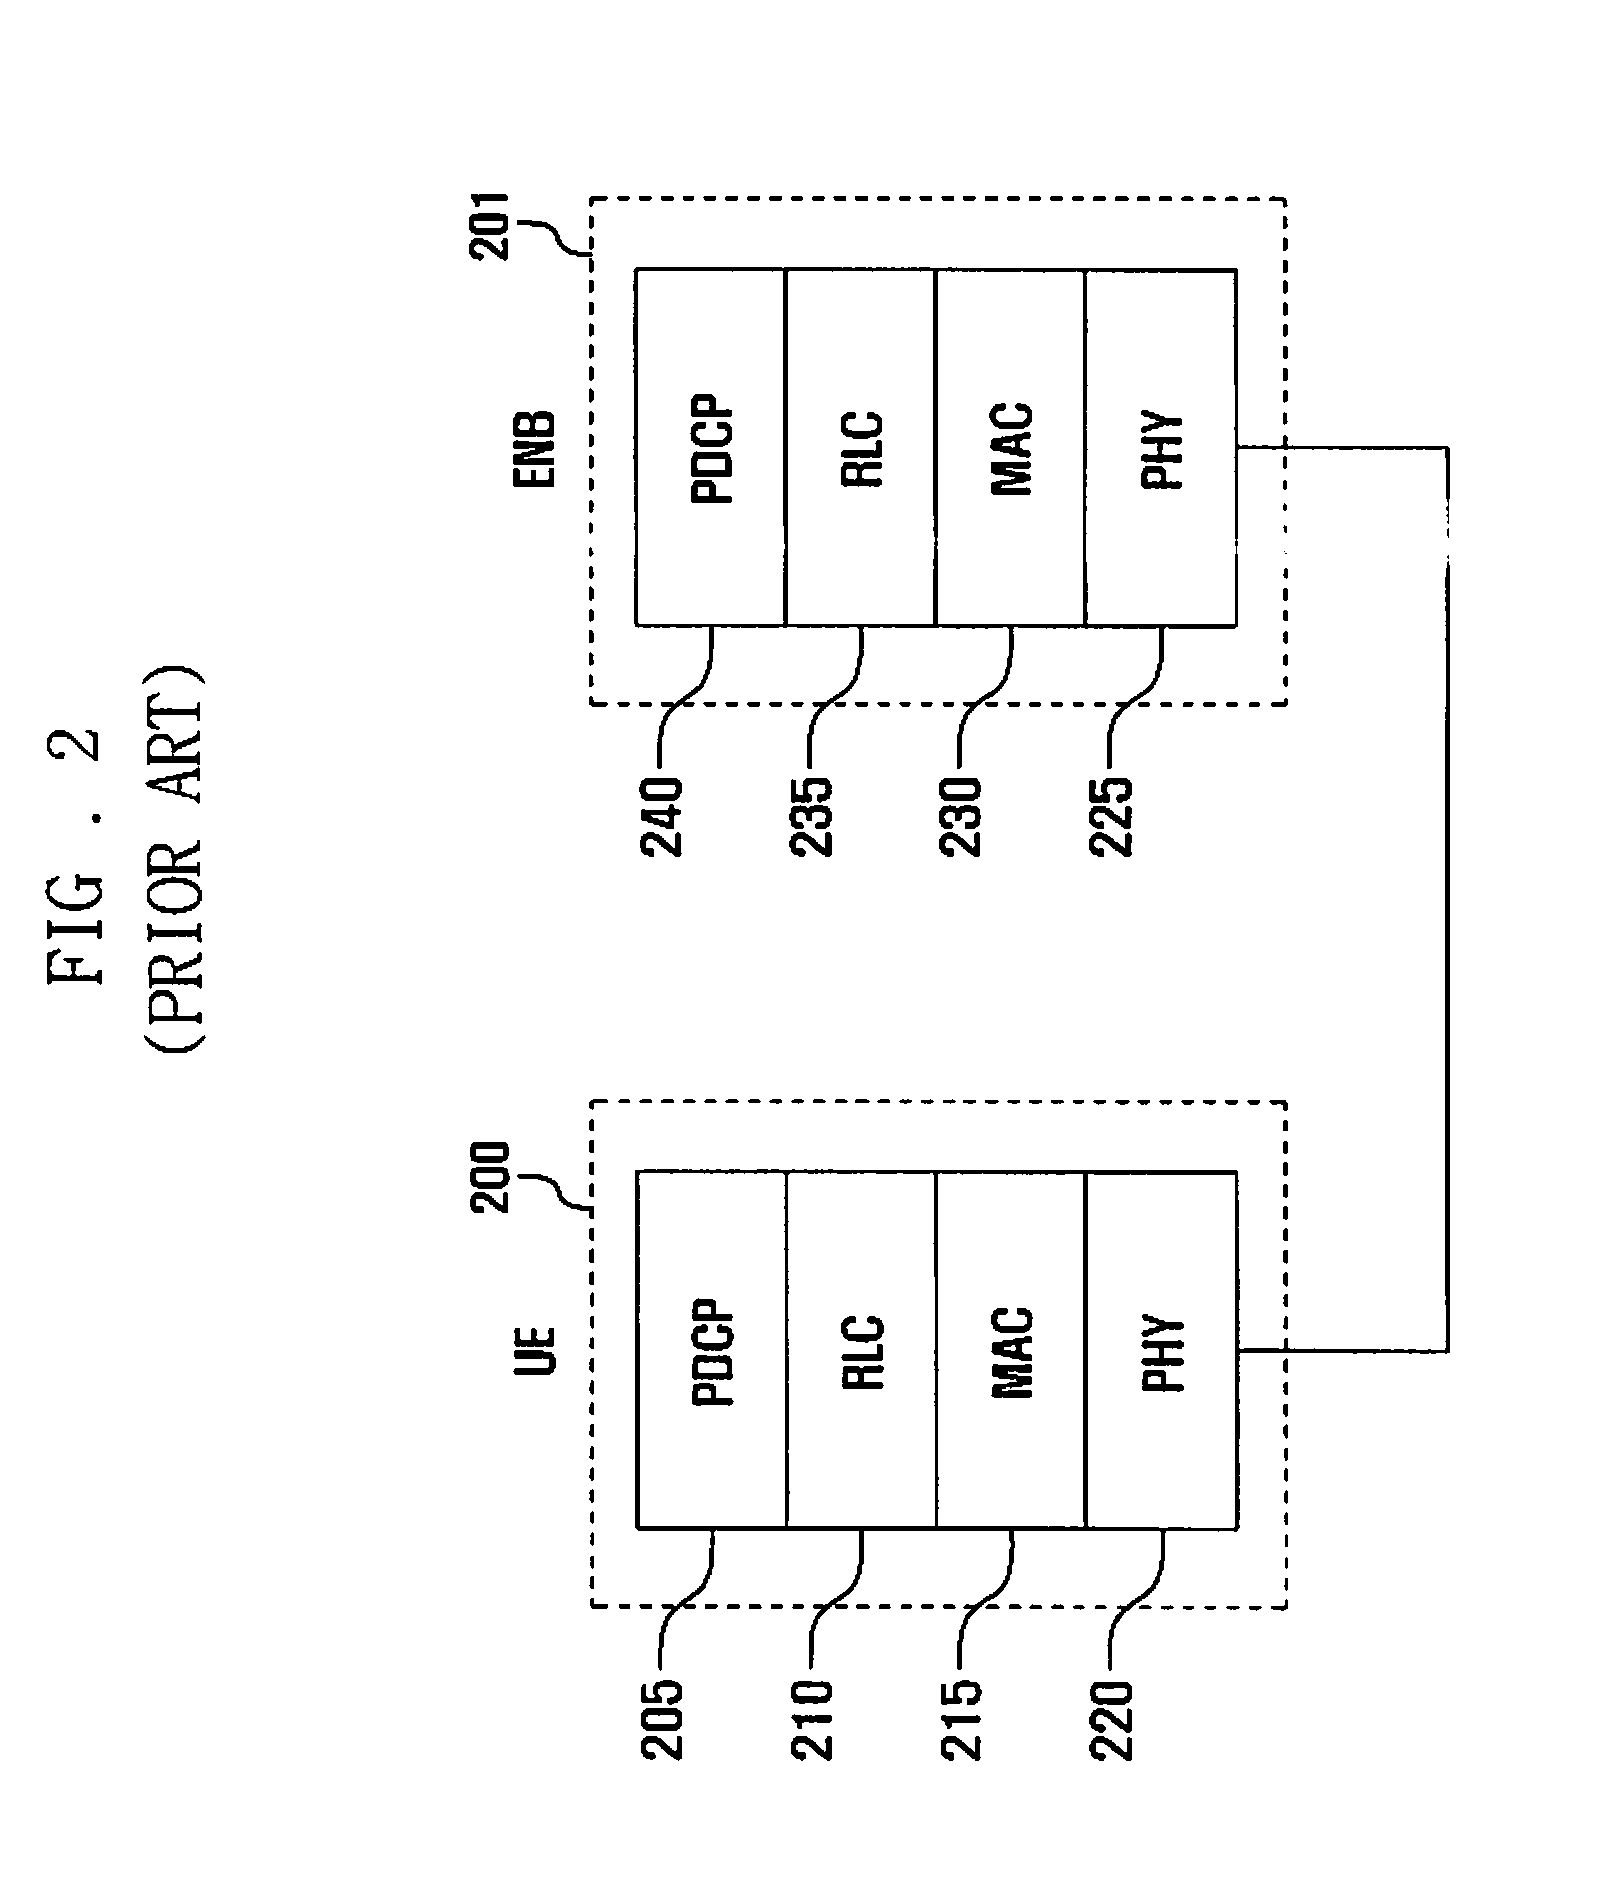 Power headroom reporting method and device for wireless communication system